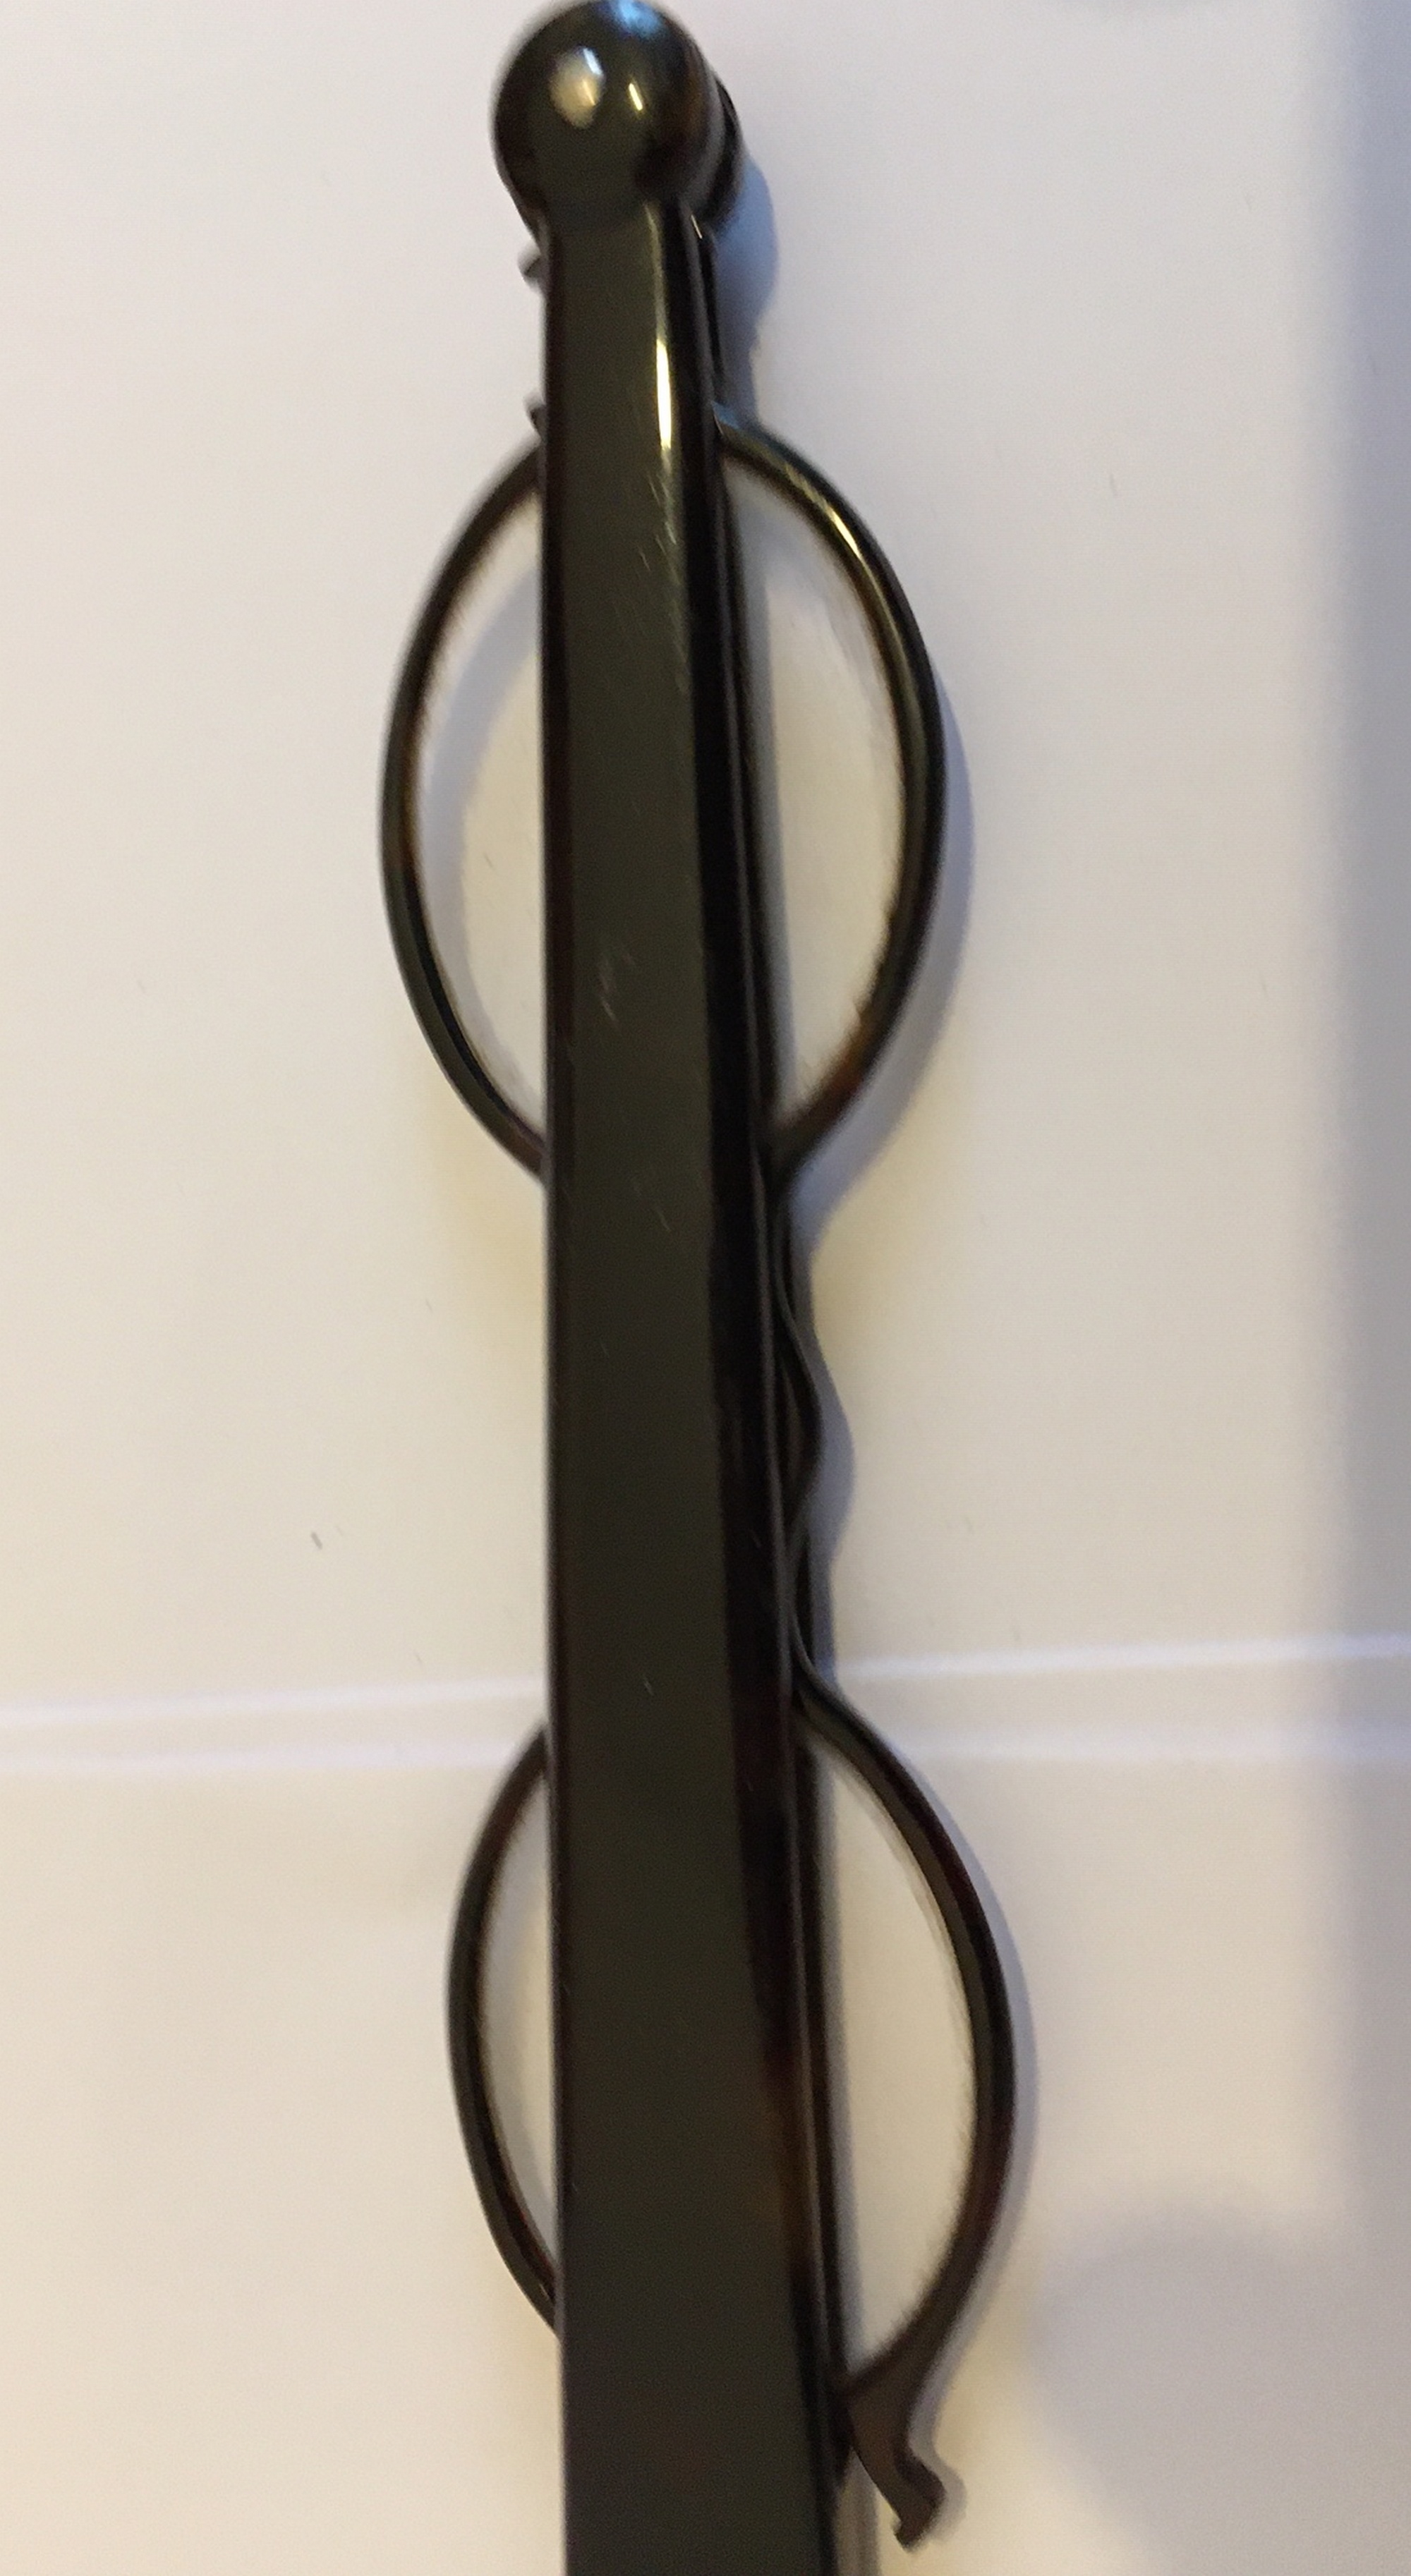 Antique Tortoiseshell Lorgnette - 30.0cm long and 12.0cm at the widest. - Image 2 of 7